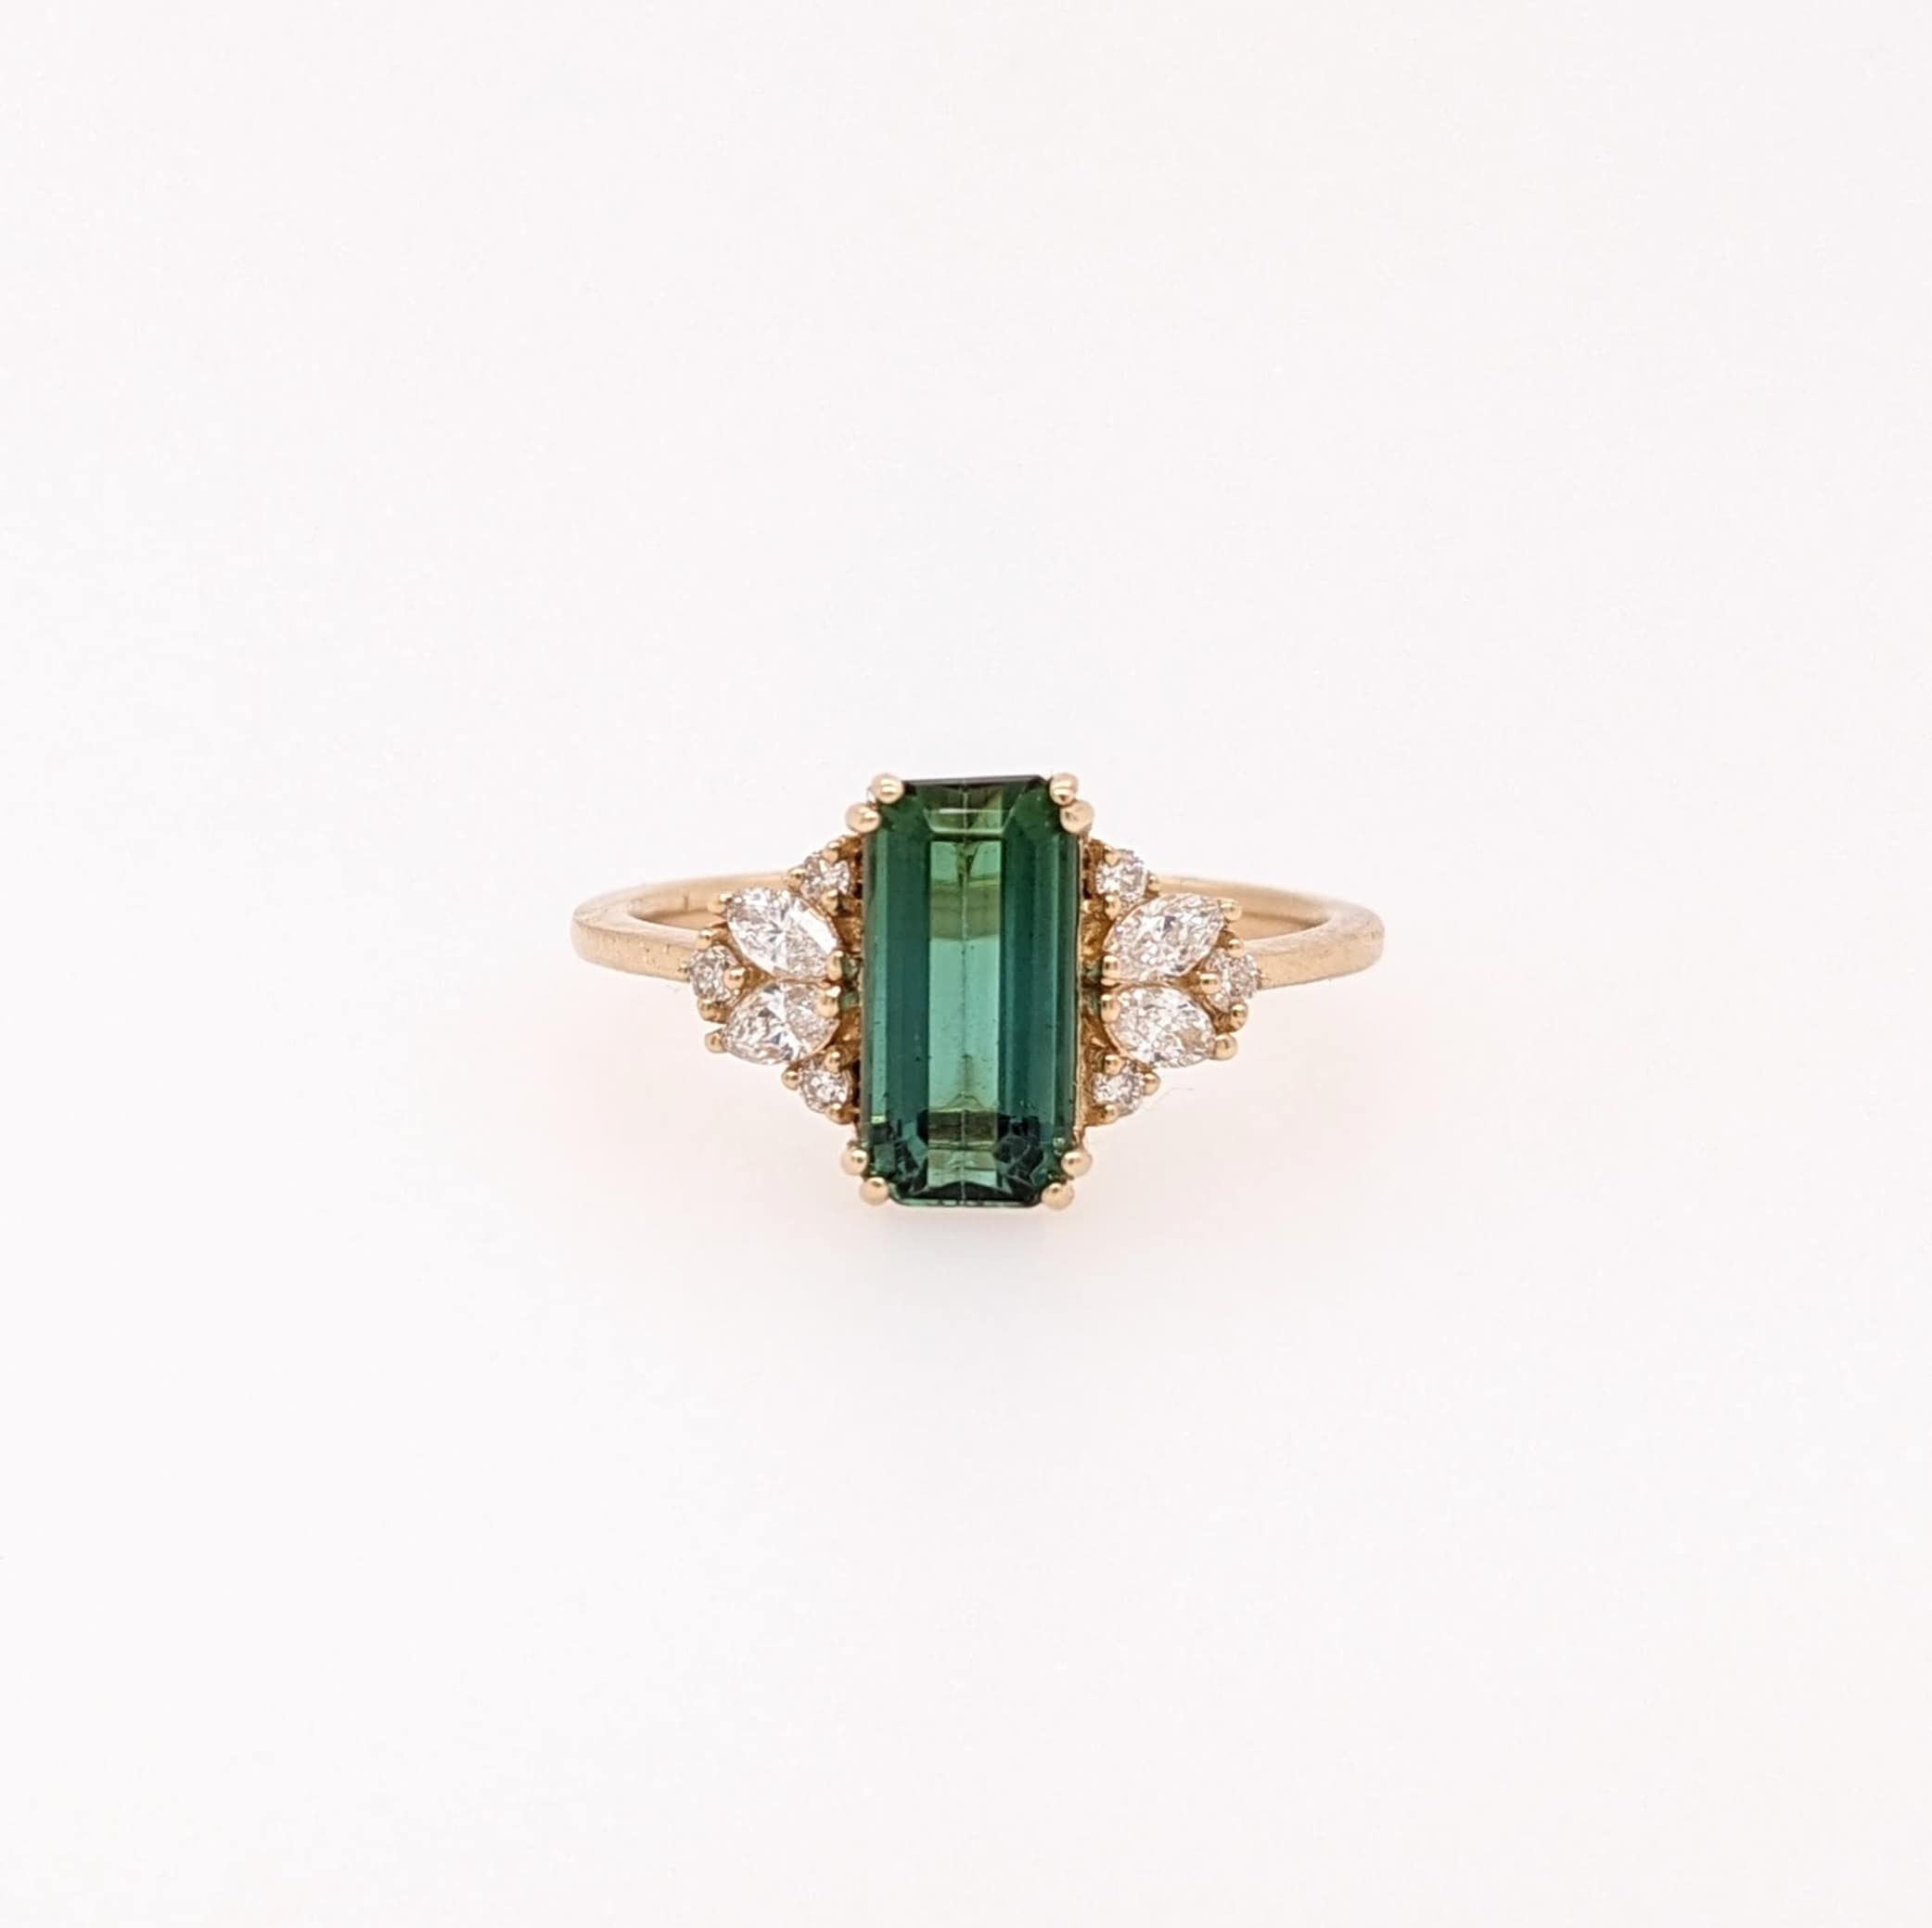 Chrome Tourmaline Ring in 14k Solid Yellow Gold with Natural Diamond Accents | Elongated Emerald Cut 6x5mm | October Birthstone